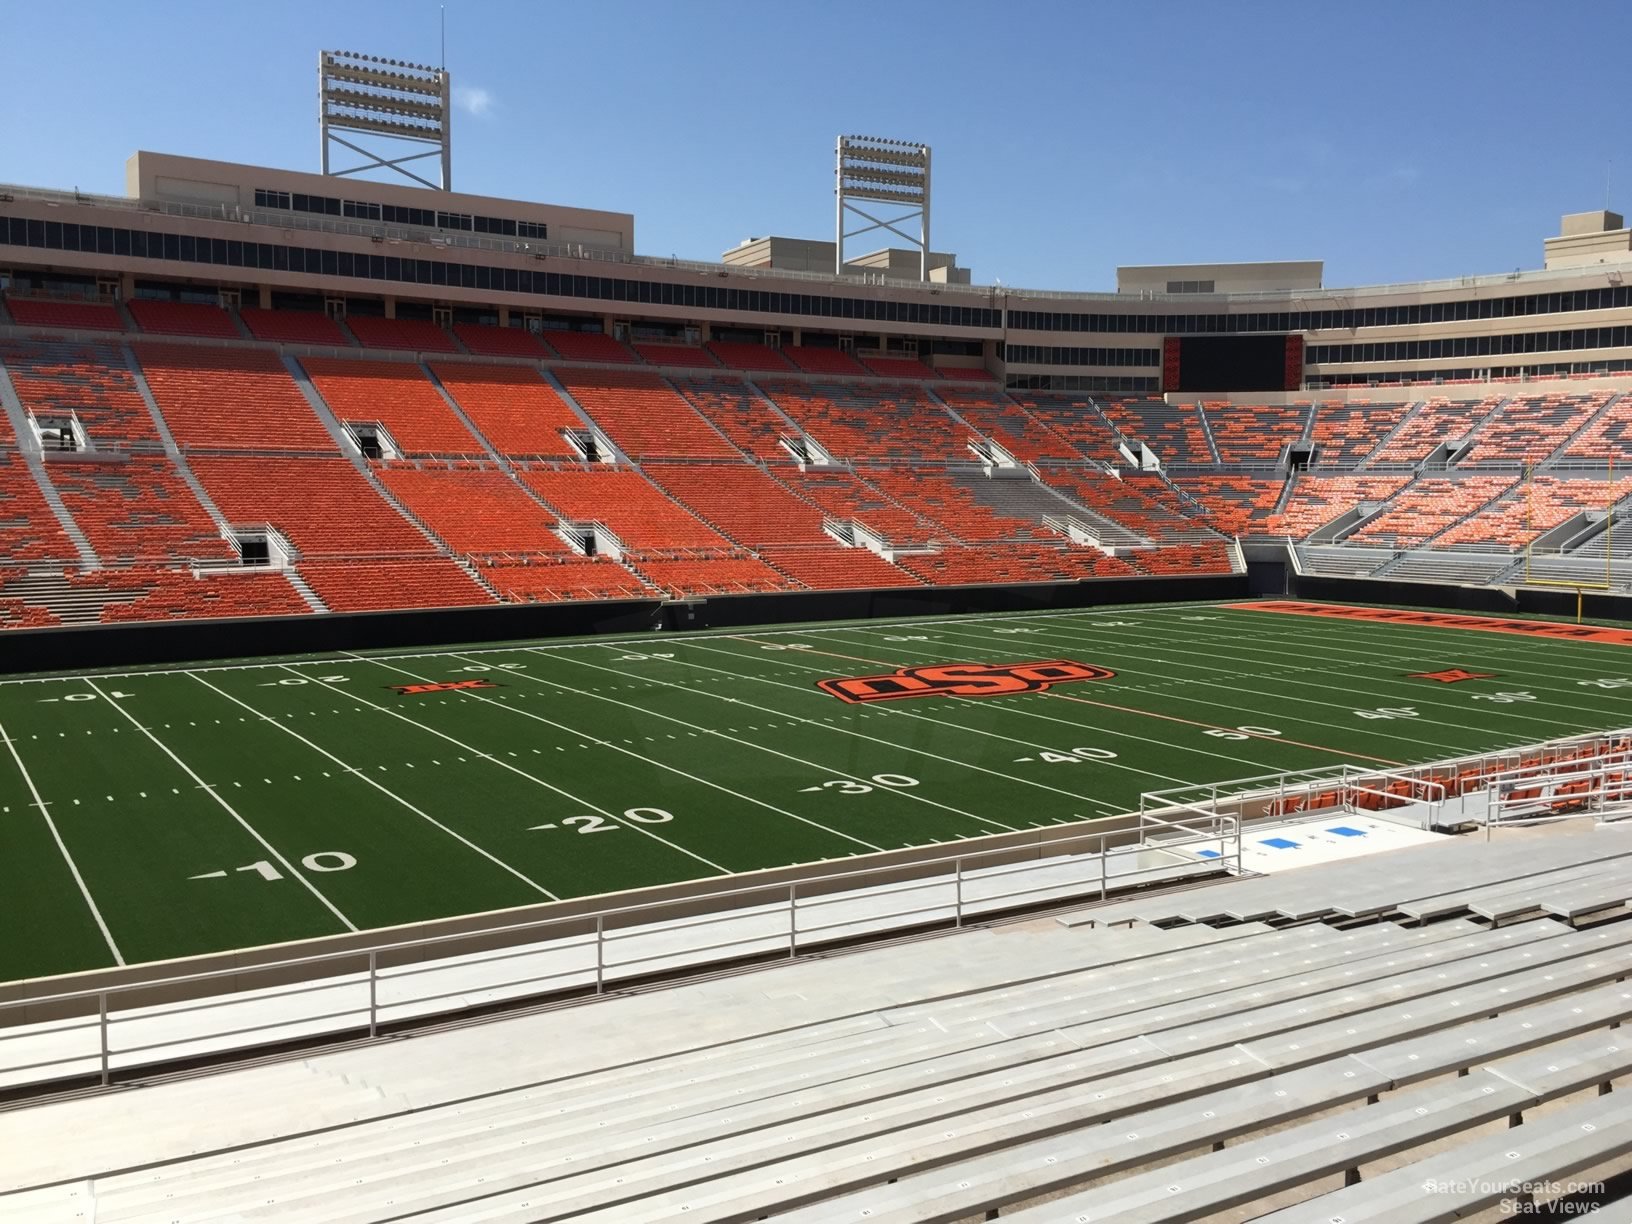 section 227a, row 20 seat view  - boone pickens stadium